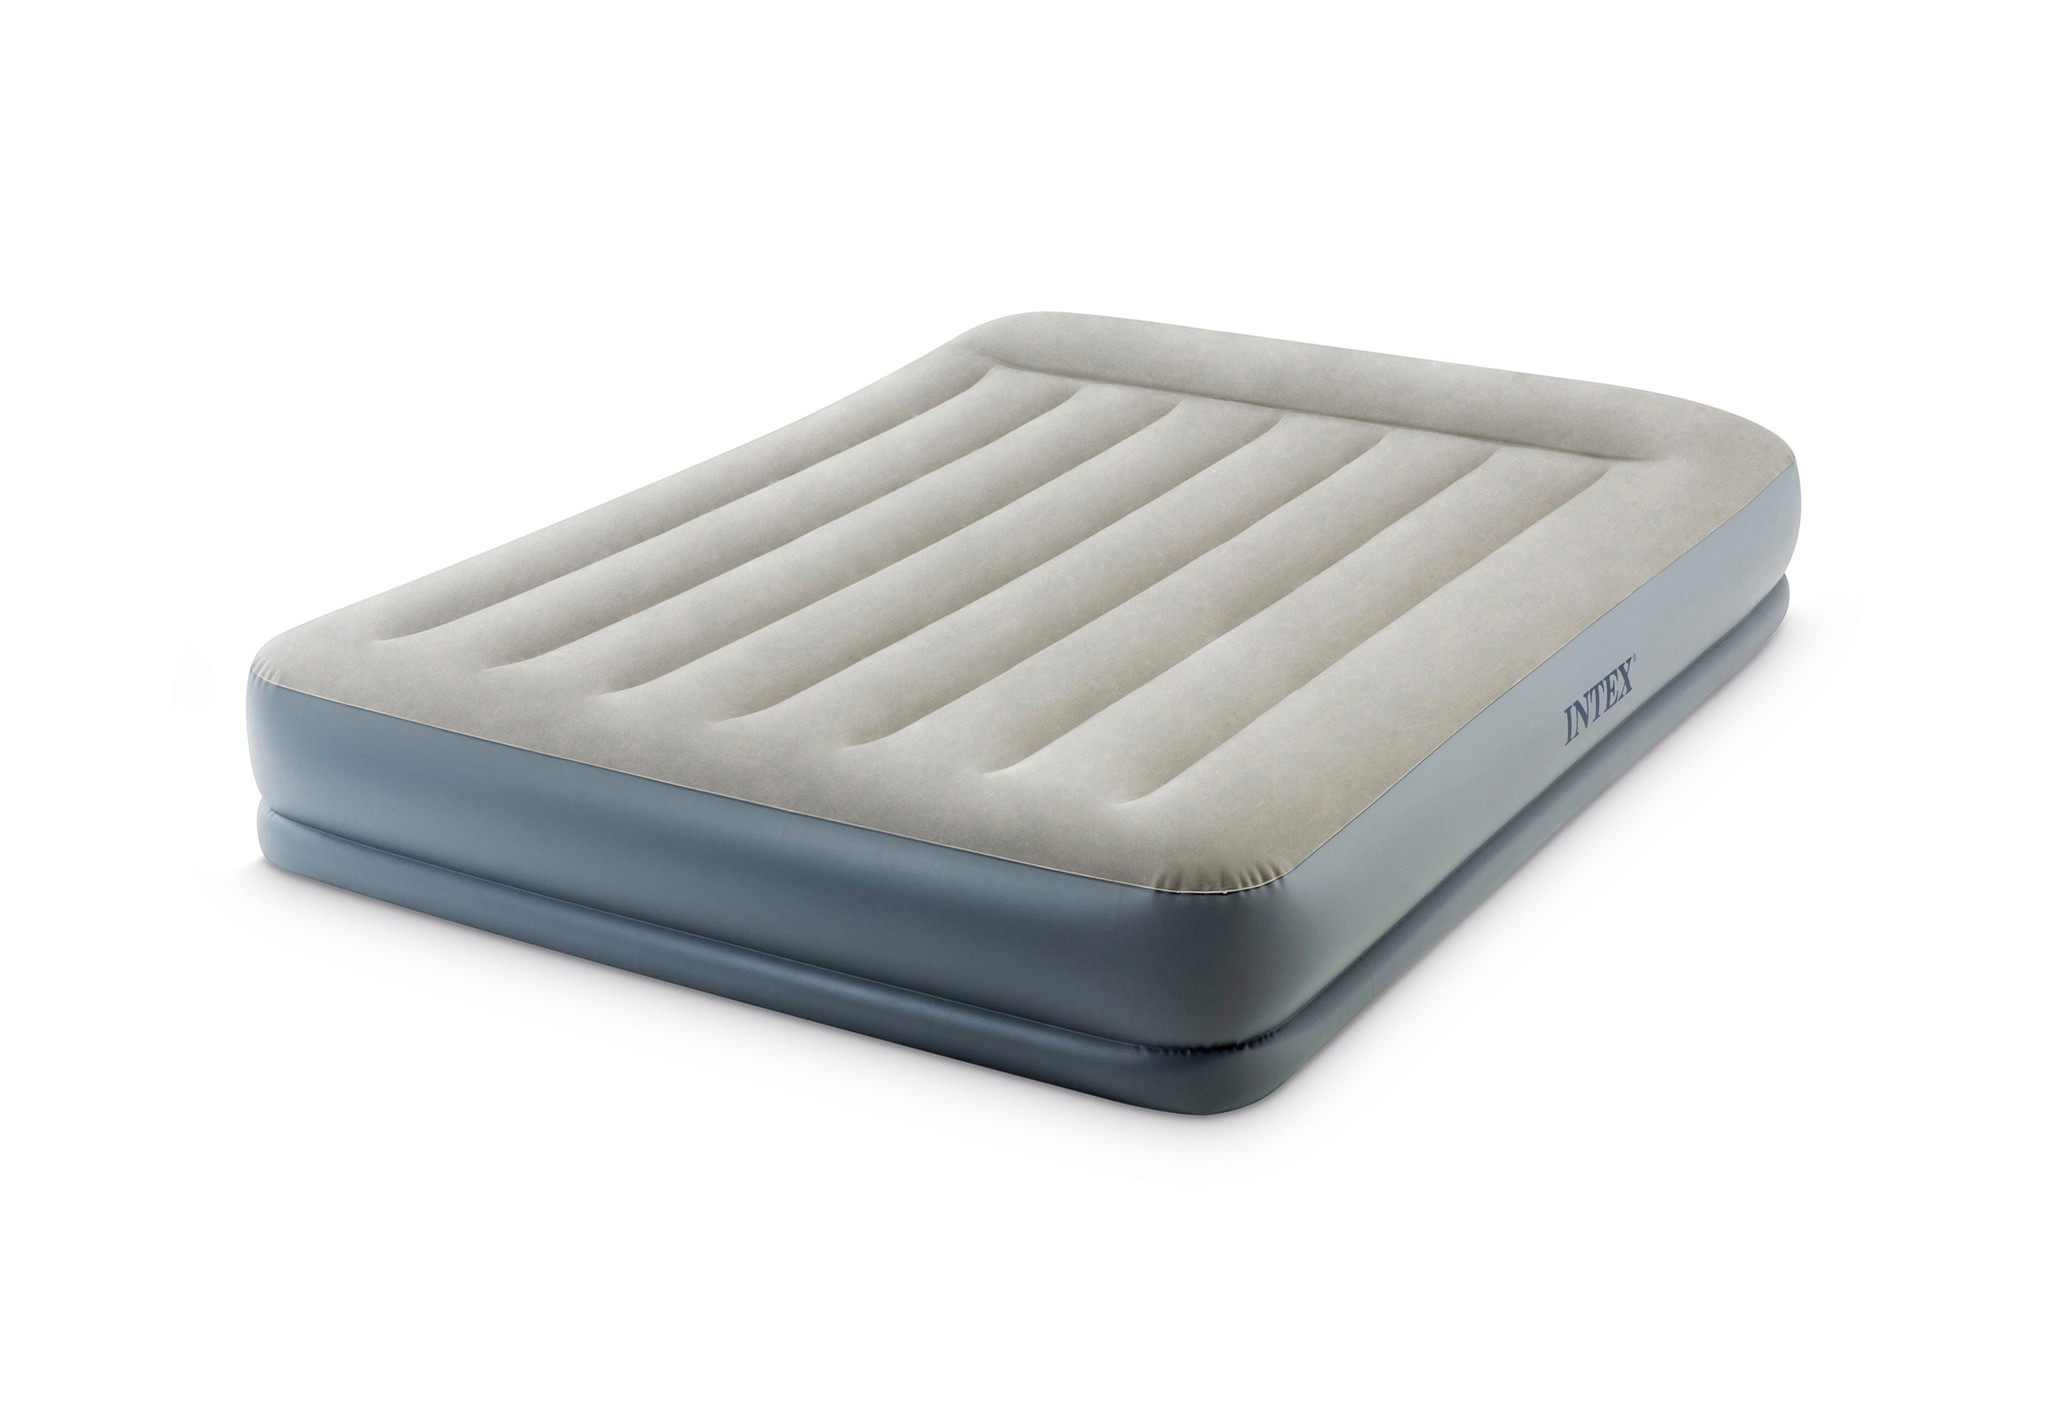 Intex Queen Pillow Rest Mid-Rise - 2 persoons - cm | Luchtbedshop.com